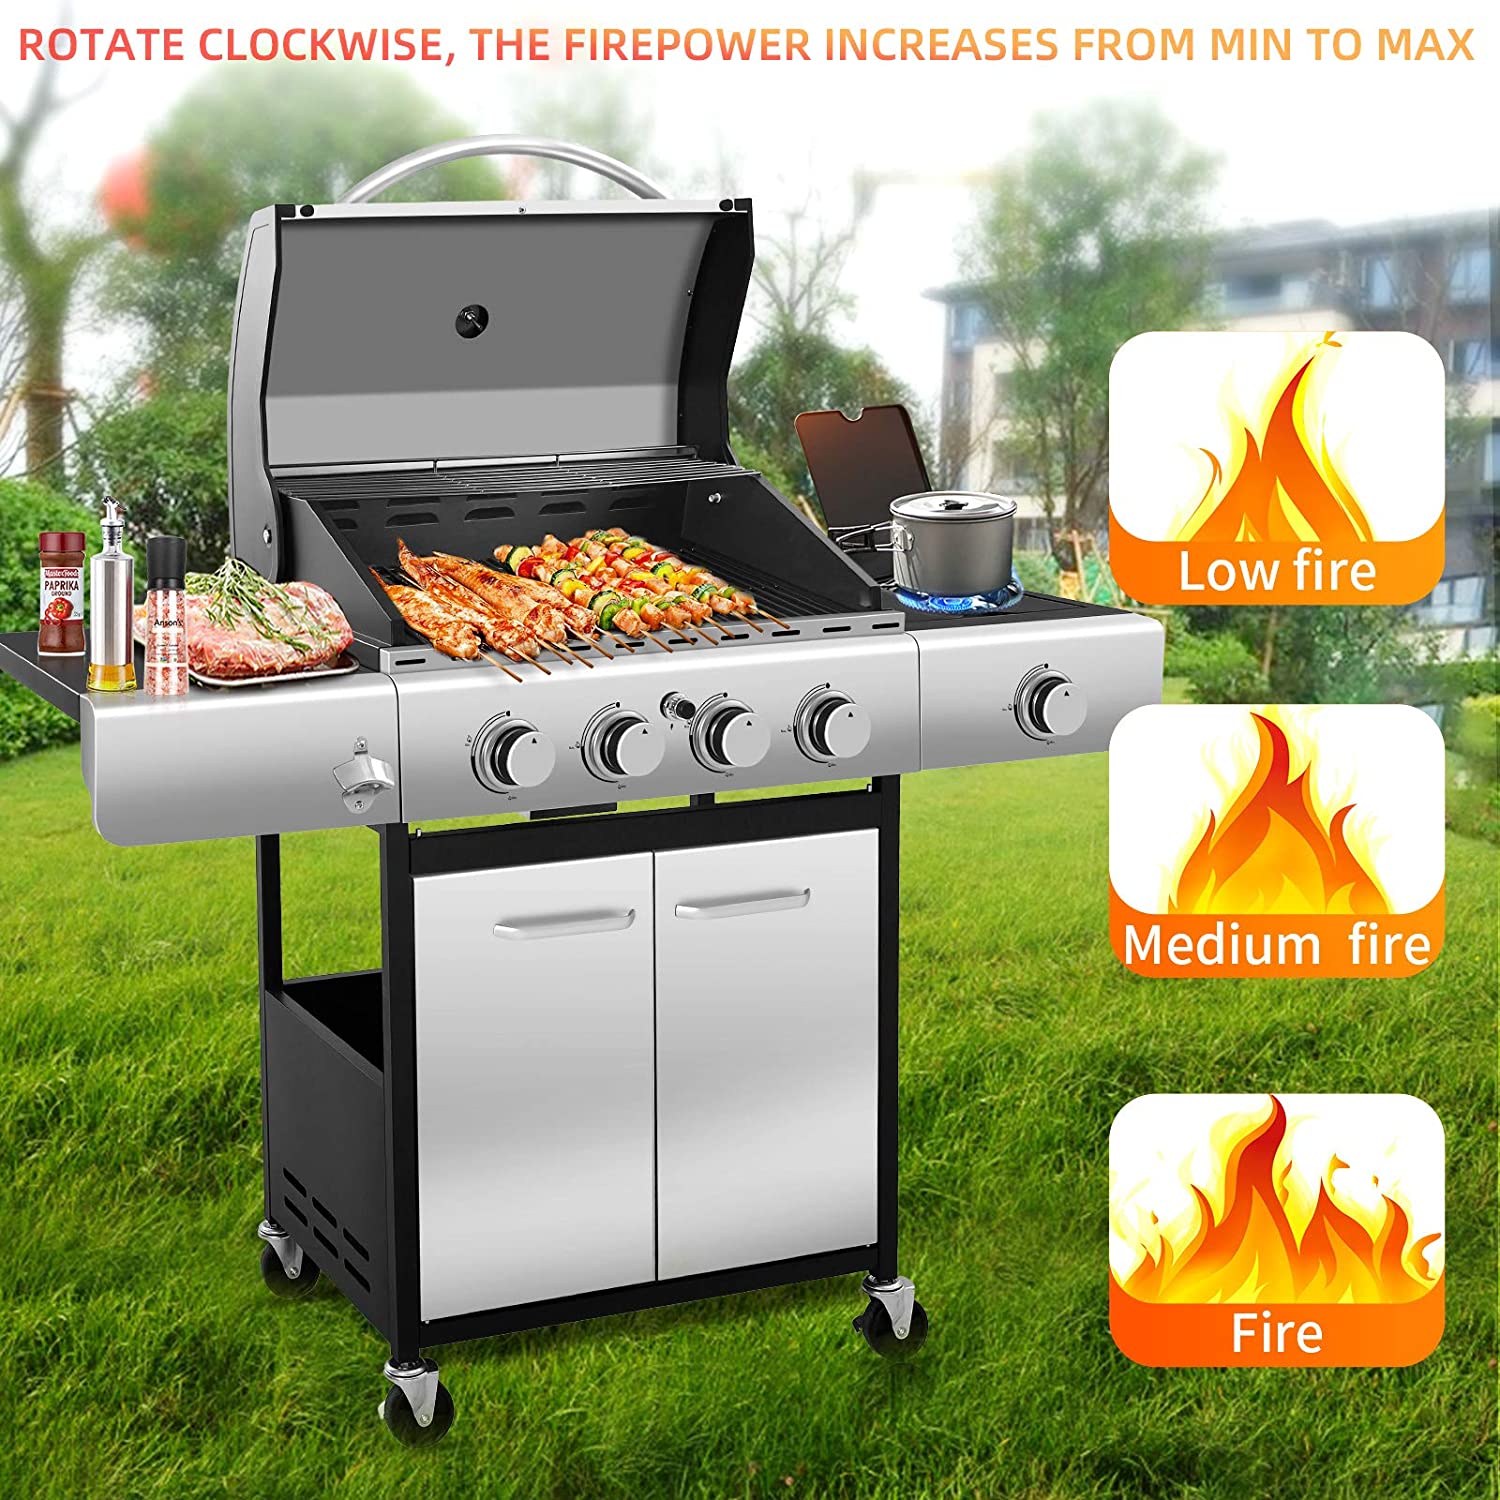 Outdoor stainless steel home patio grill gas charcoal dual-purpose grill BBQ